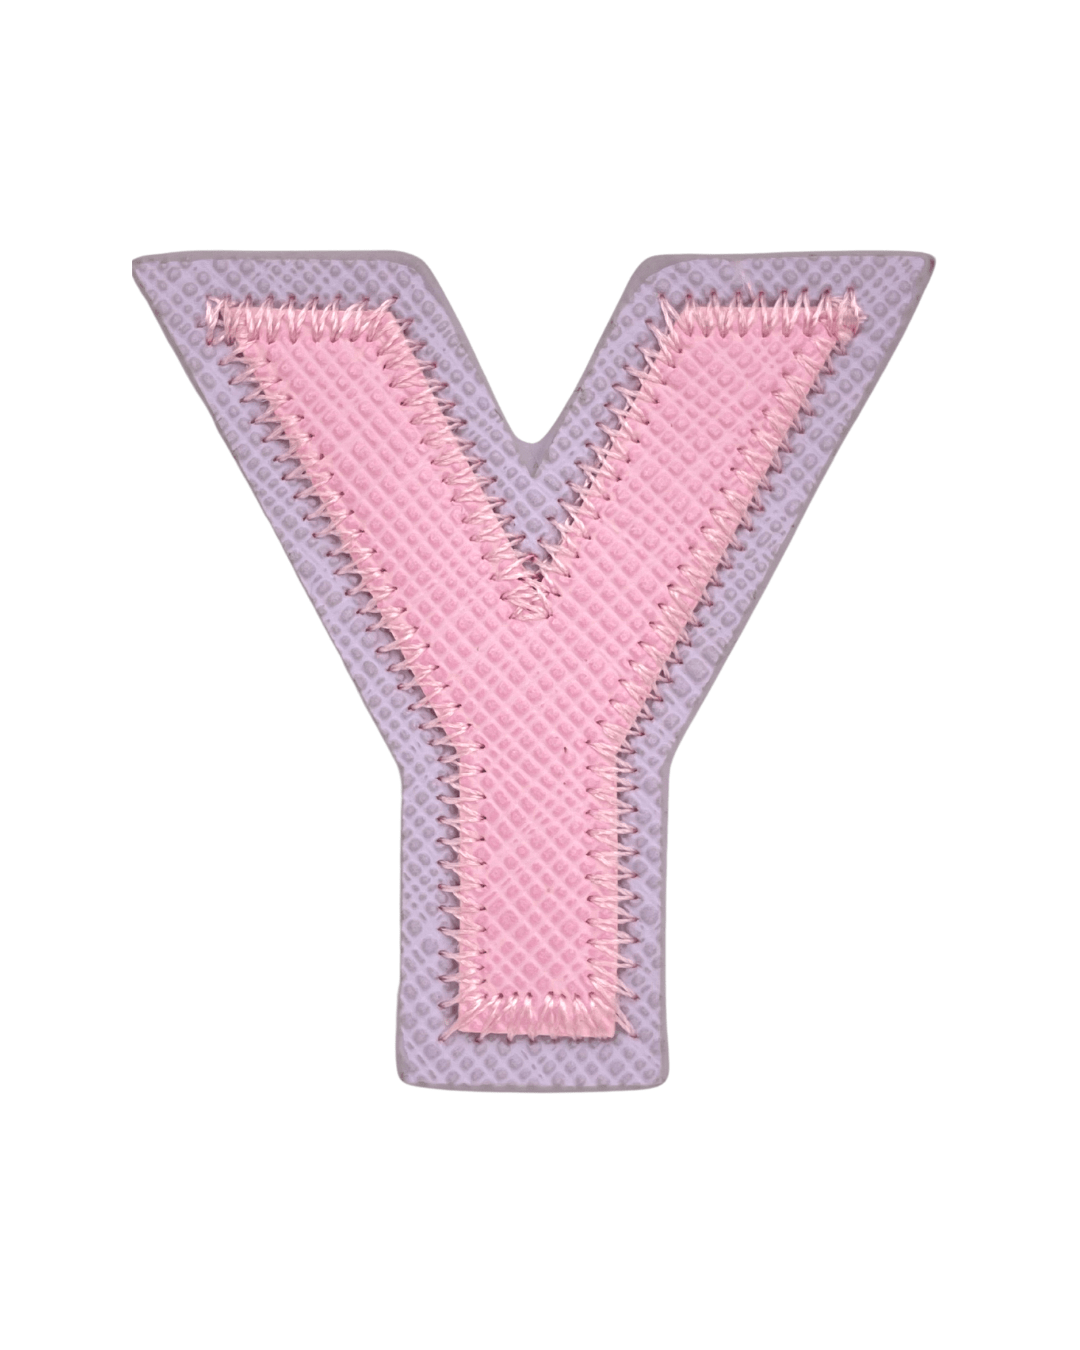 Pink + Purple Vegan Leather Letter Patches - American Deadstock